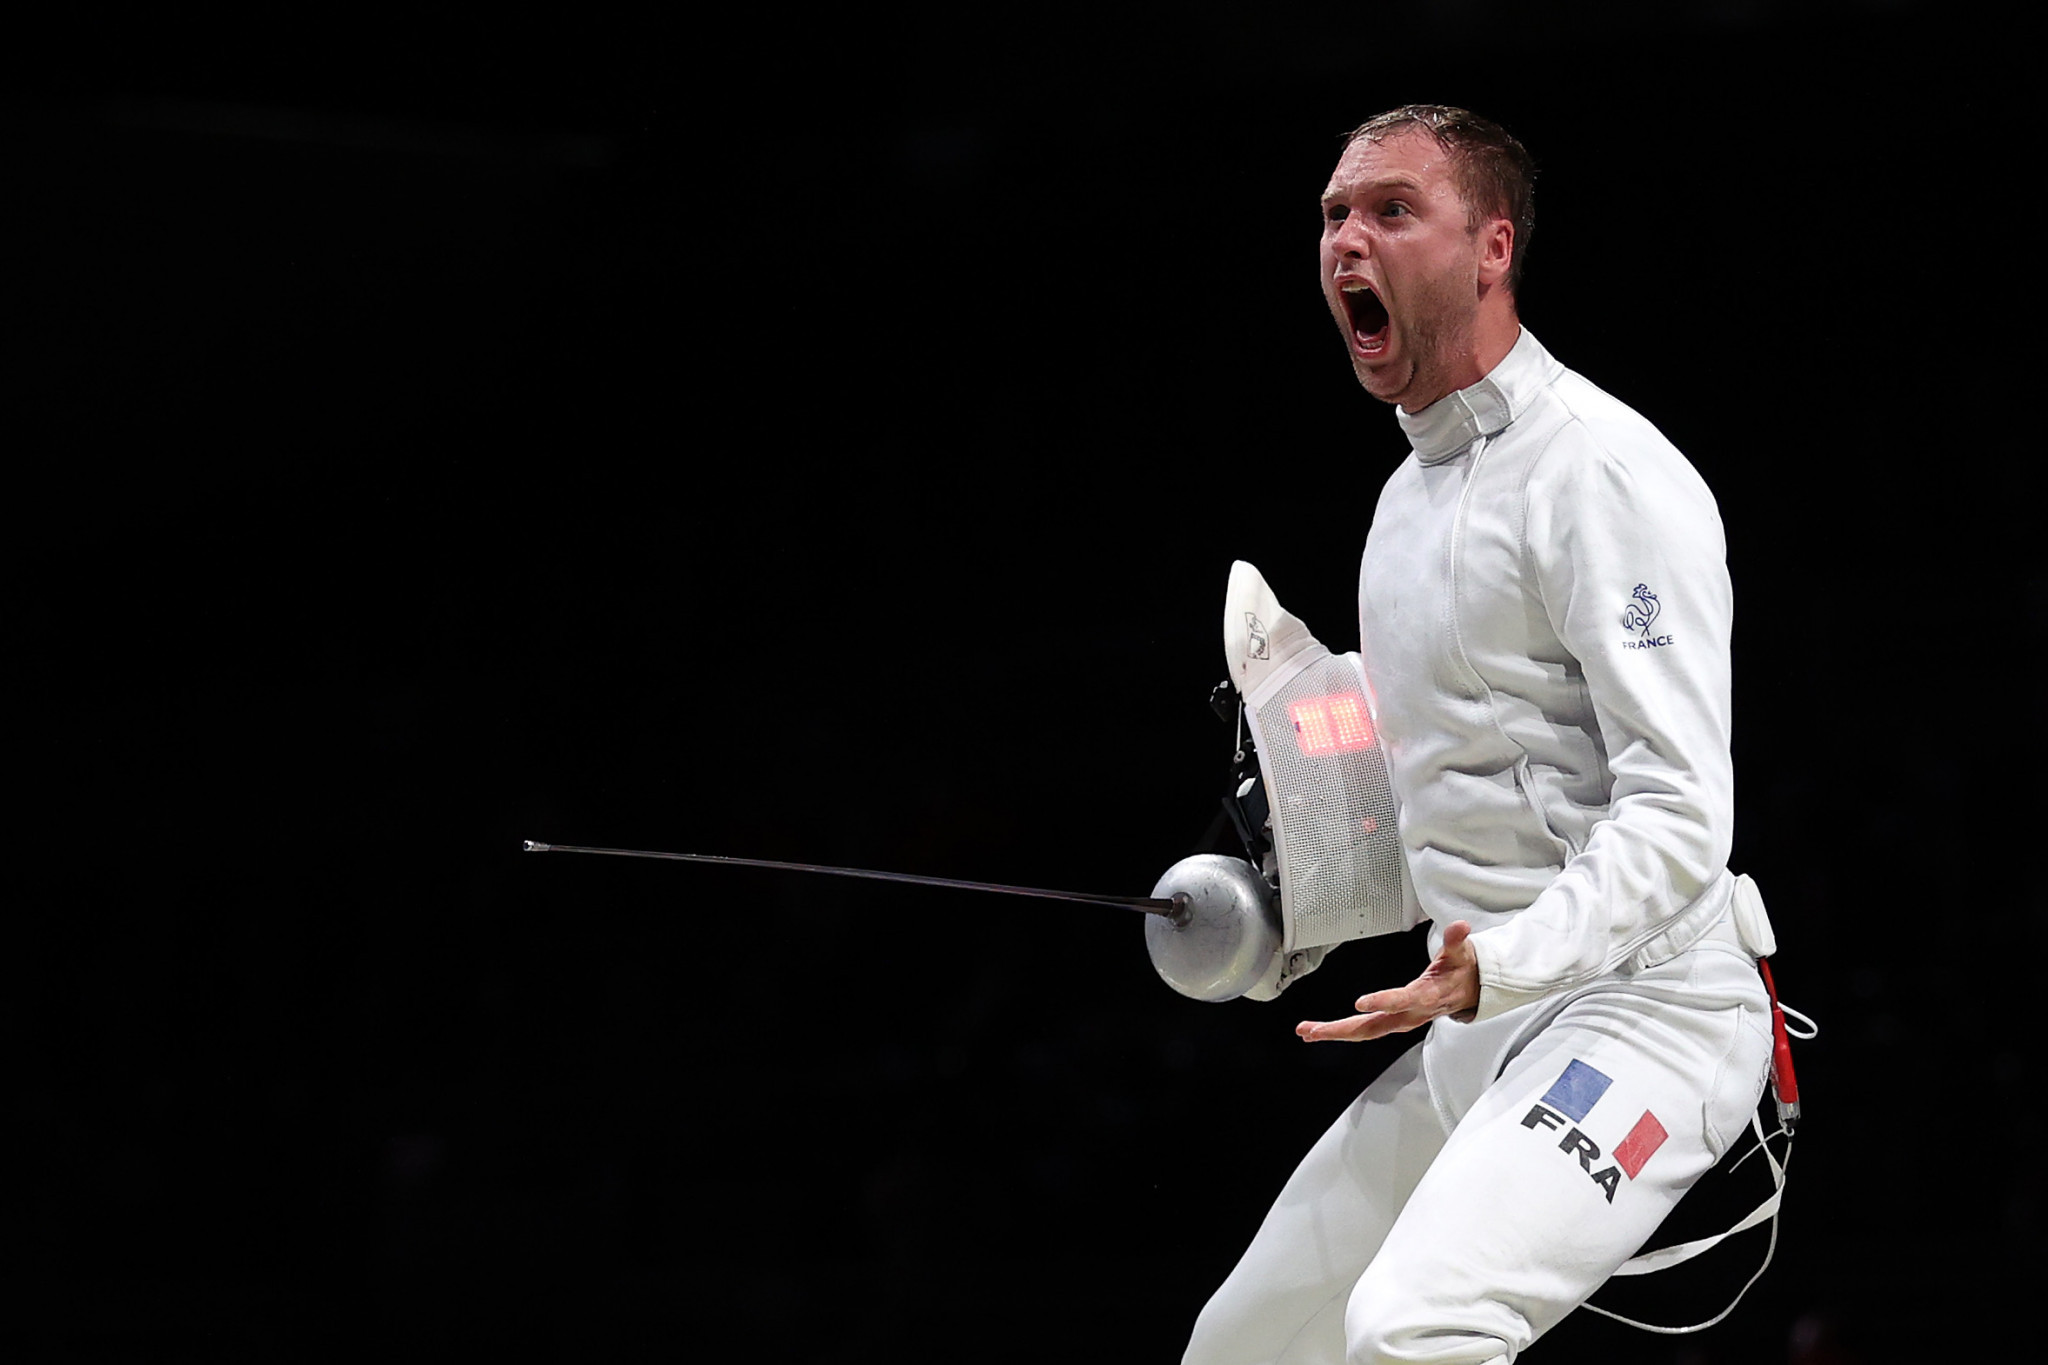 Alexandre Bardenet won the men's individual crown at the FIE Épée World Cup in Buenos Aires ©Getty Images